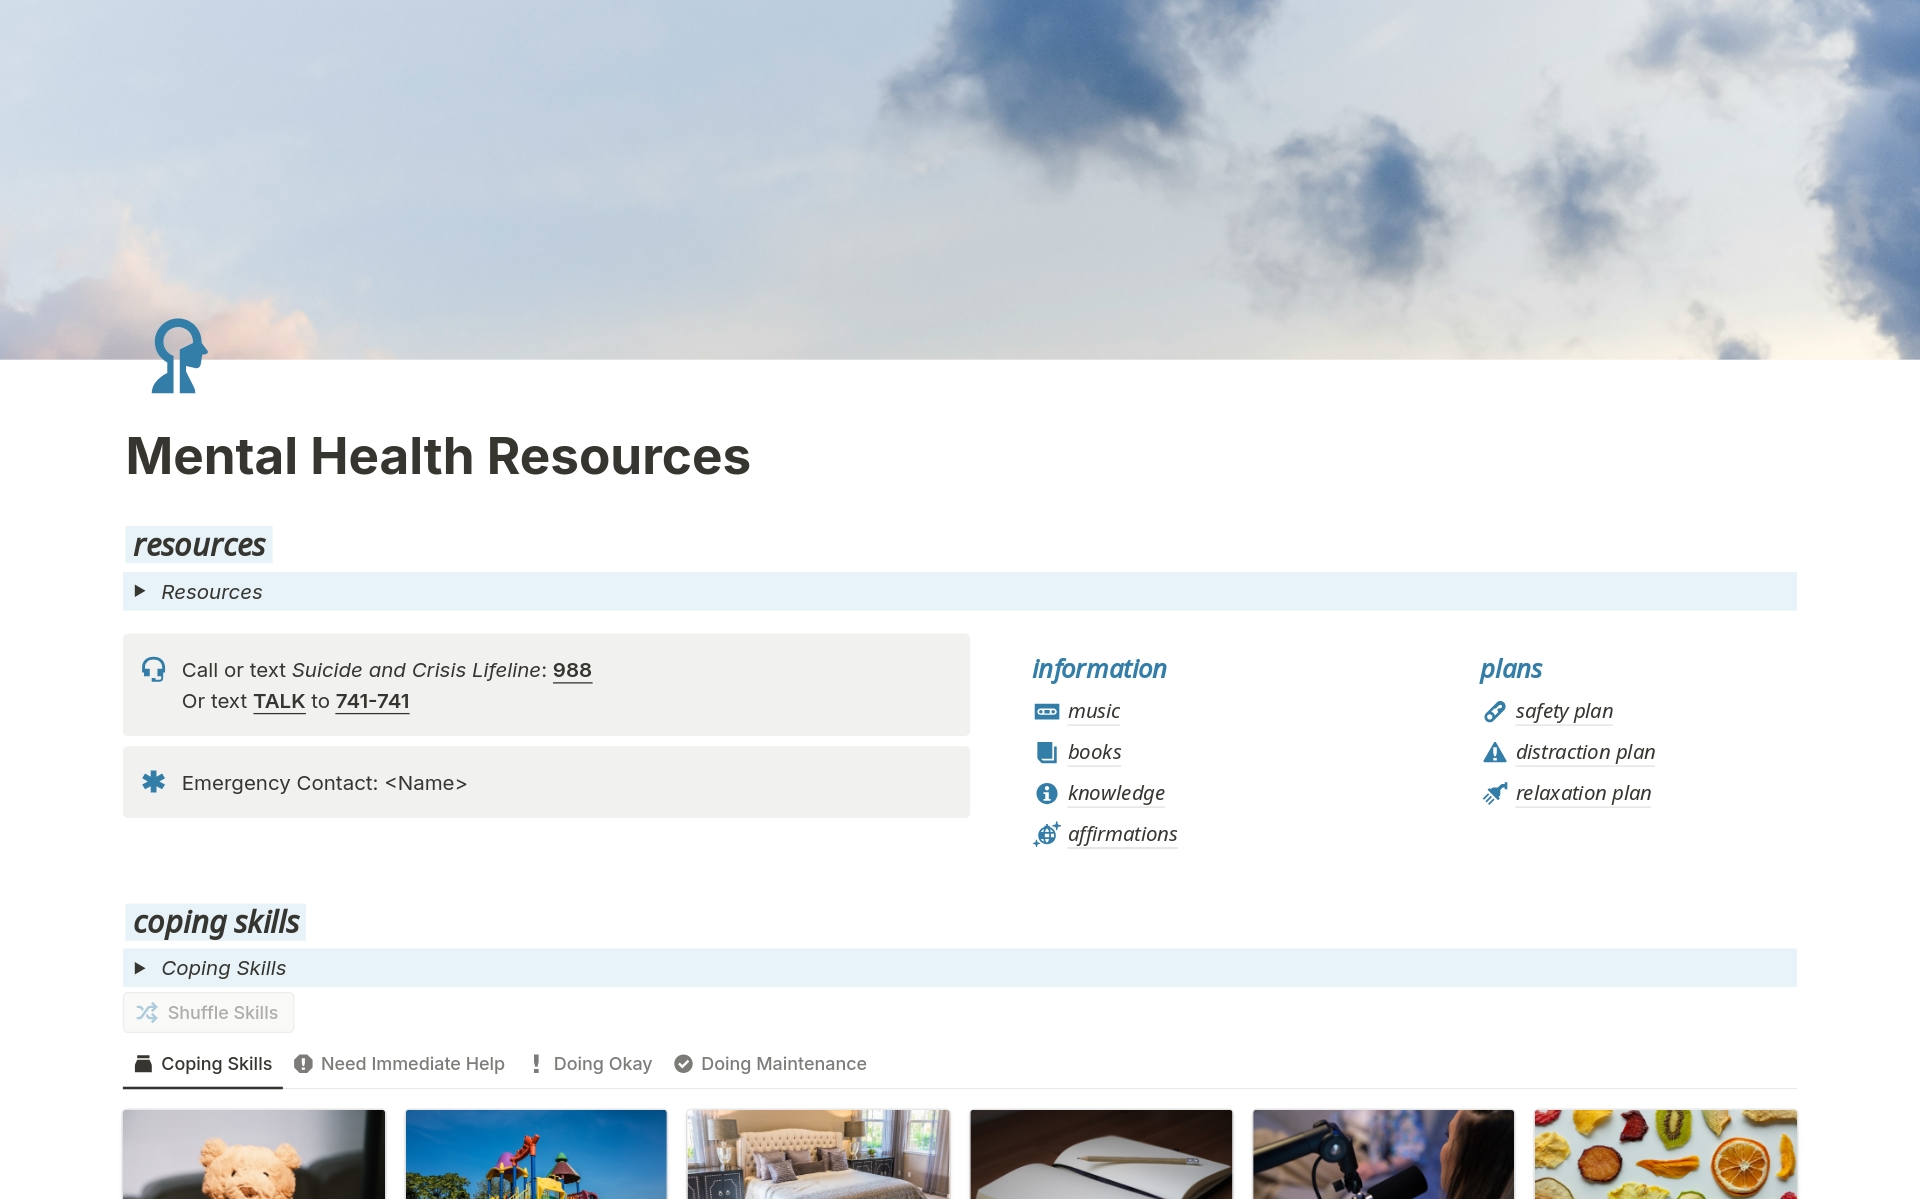 A dashboard for mental health resources including guides to create safety plans and a Personal Mission Statement, notes on various mental health topics, and a database of coping skills.